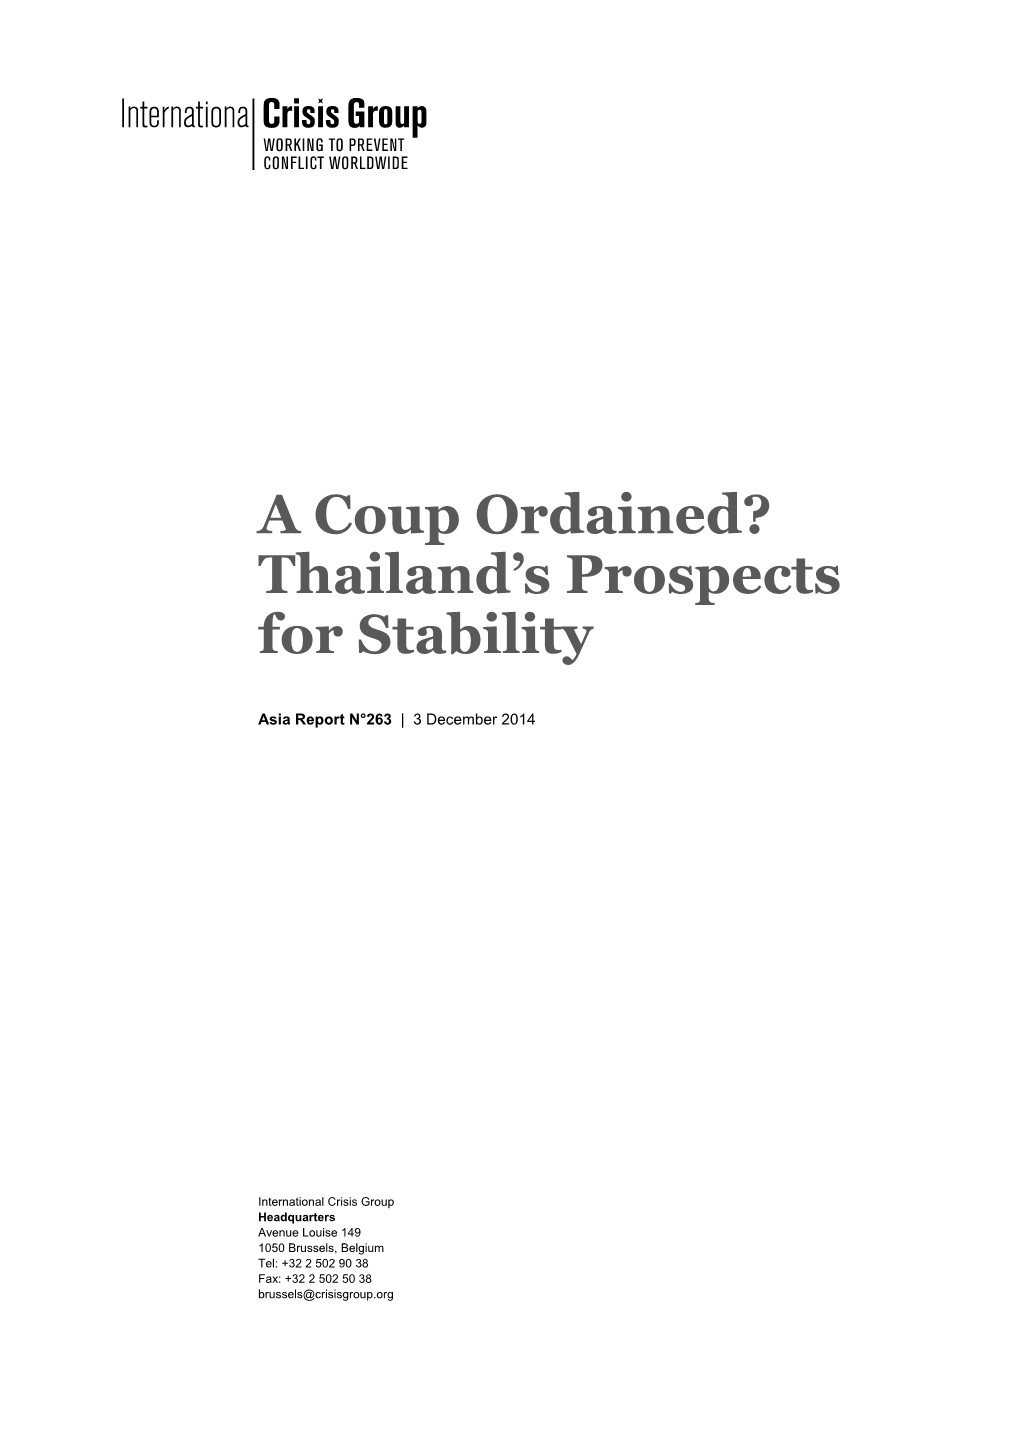 A Coup Ordained? Thailand's Prospects for Stability